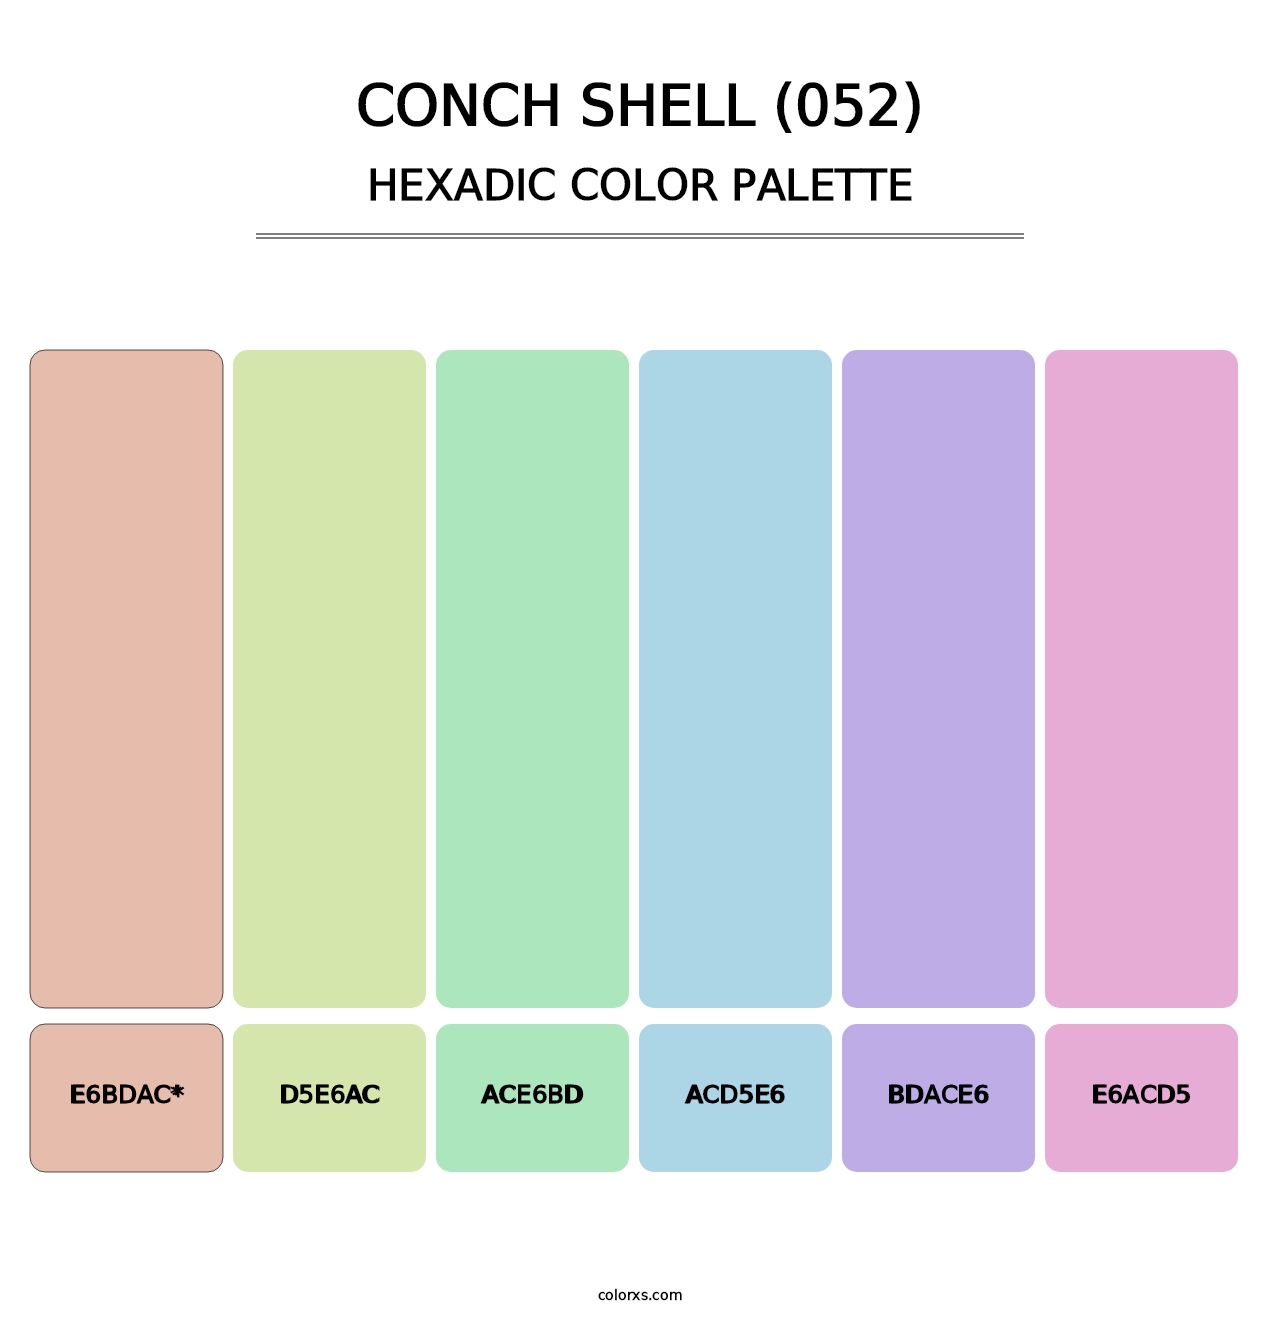 Conch Shell (052) - Hexadic Color Palette